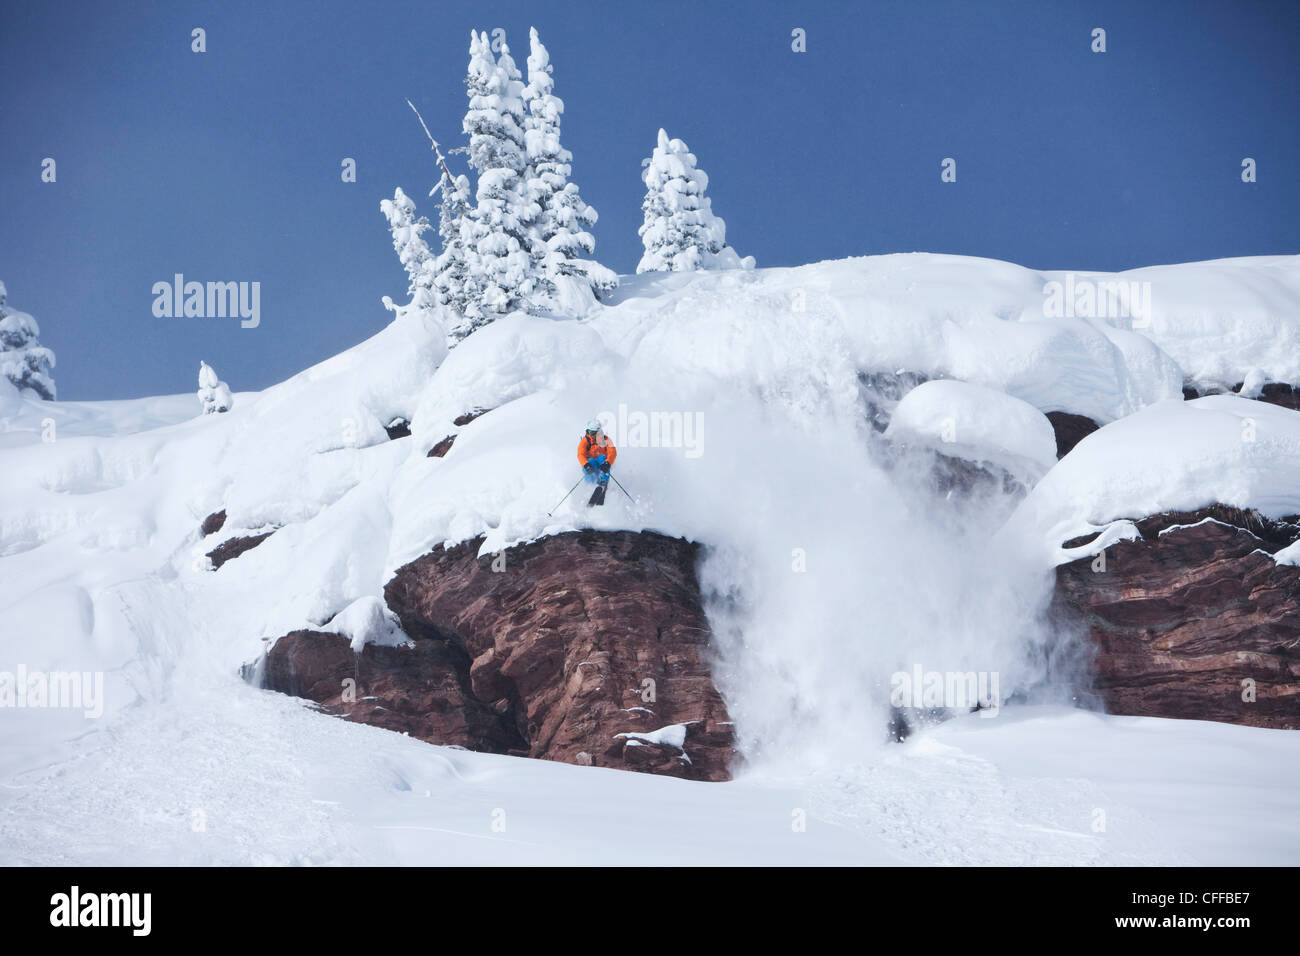 A athletic skier jumping off a cliff in the backcountry on a sunny powder day in Colorado. Stock Photo